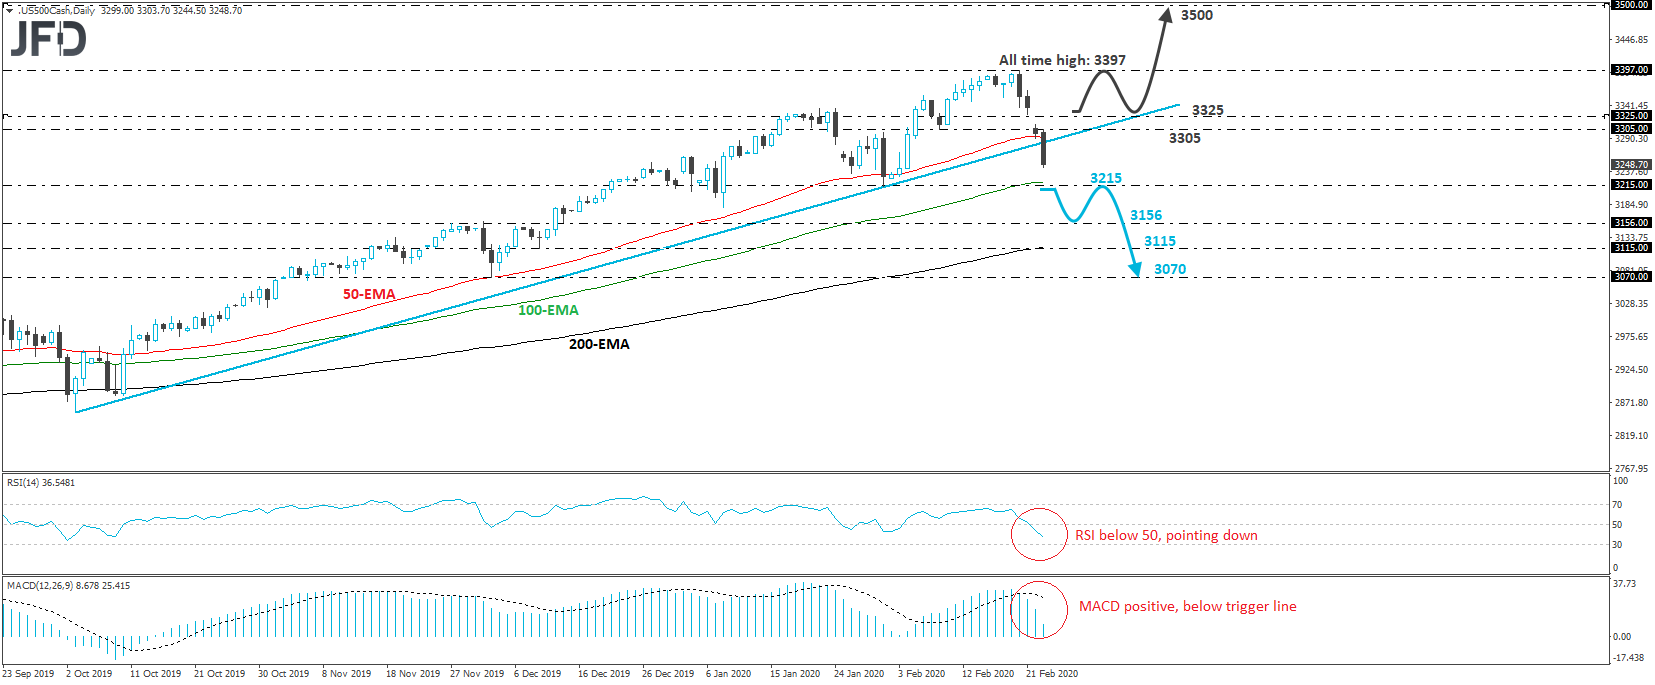 S&P 500 cash index daily chart technical analysis